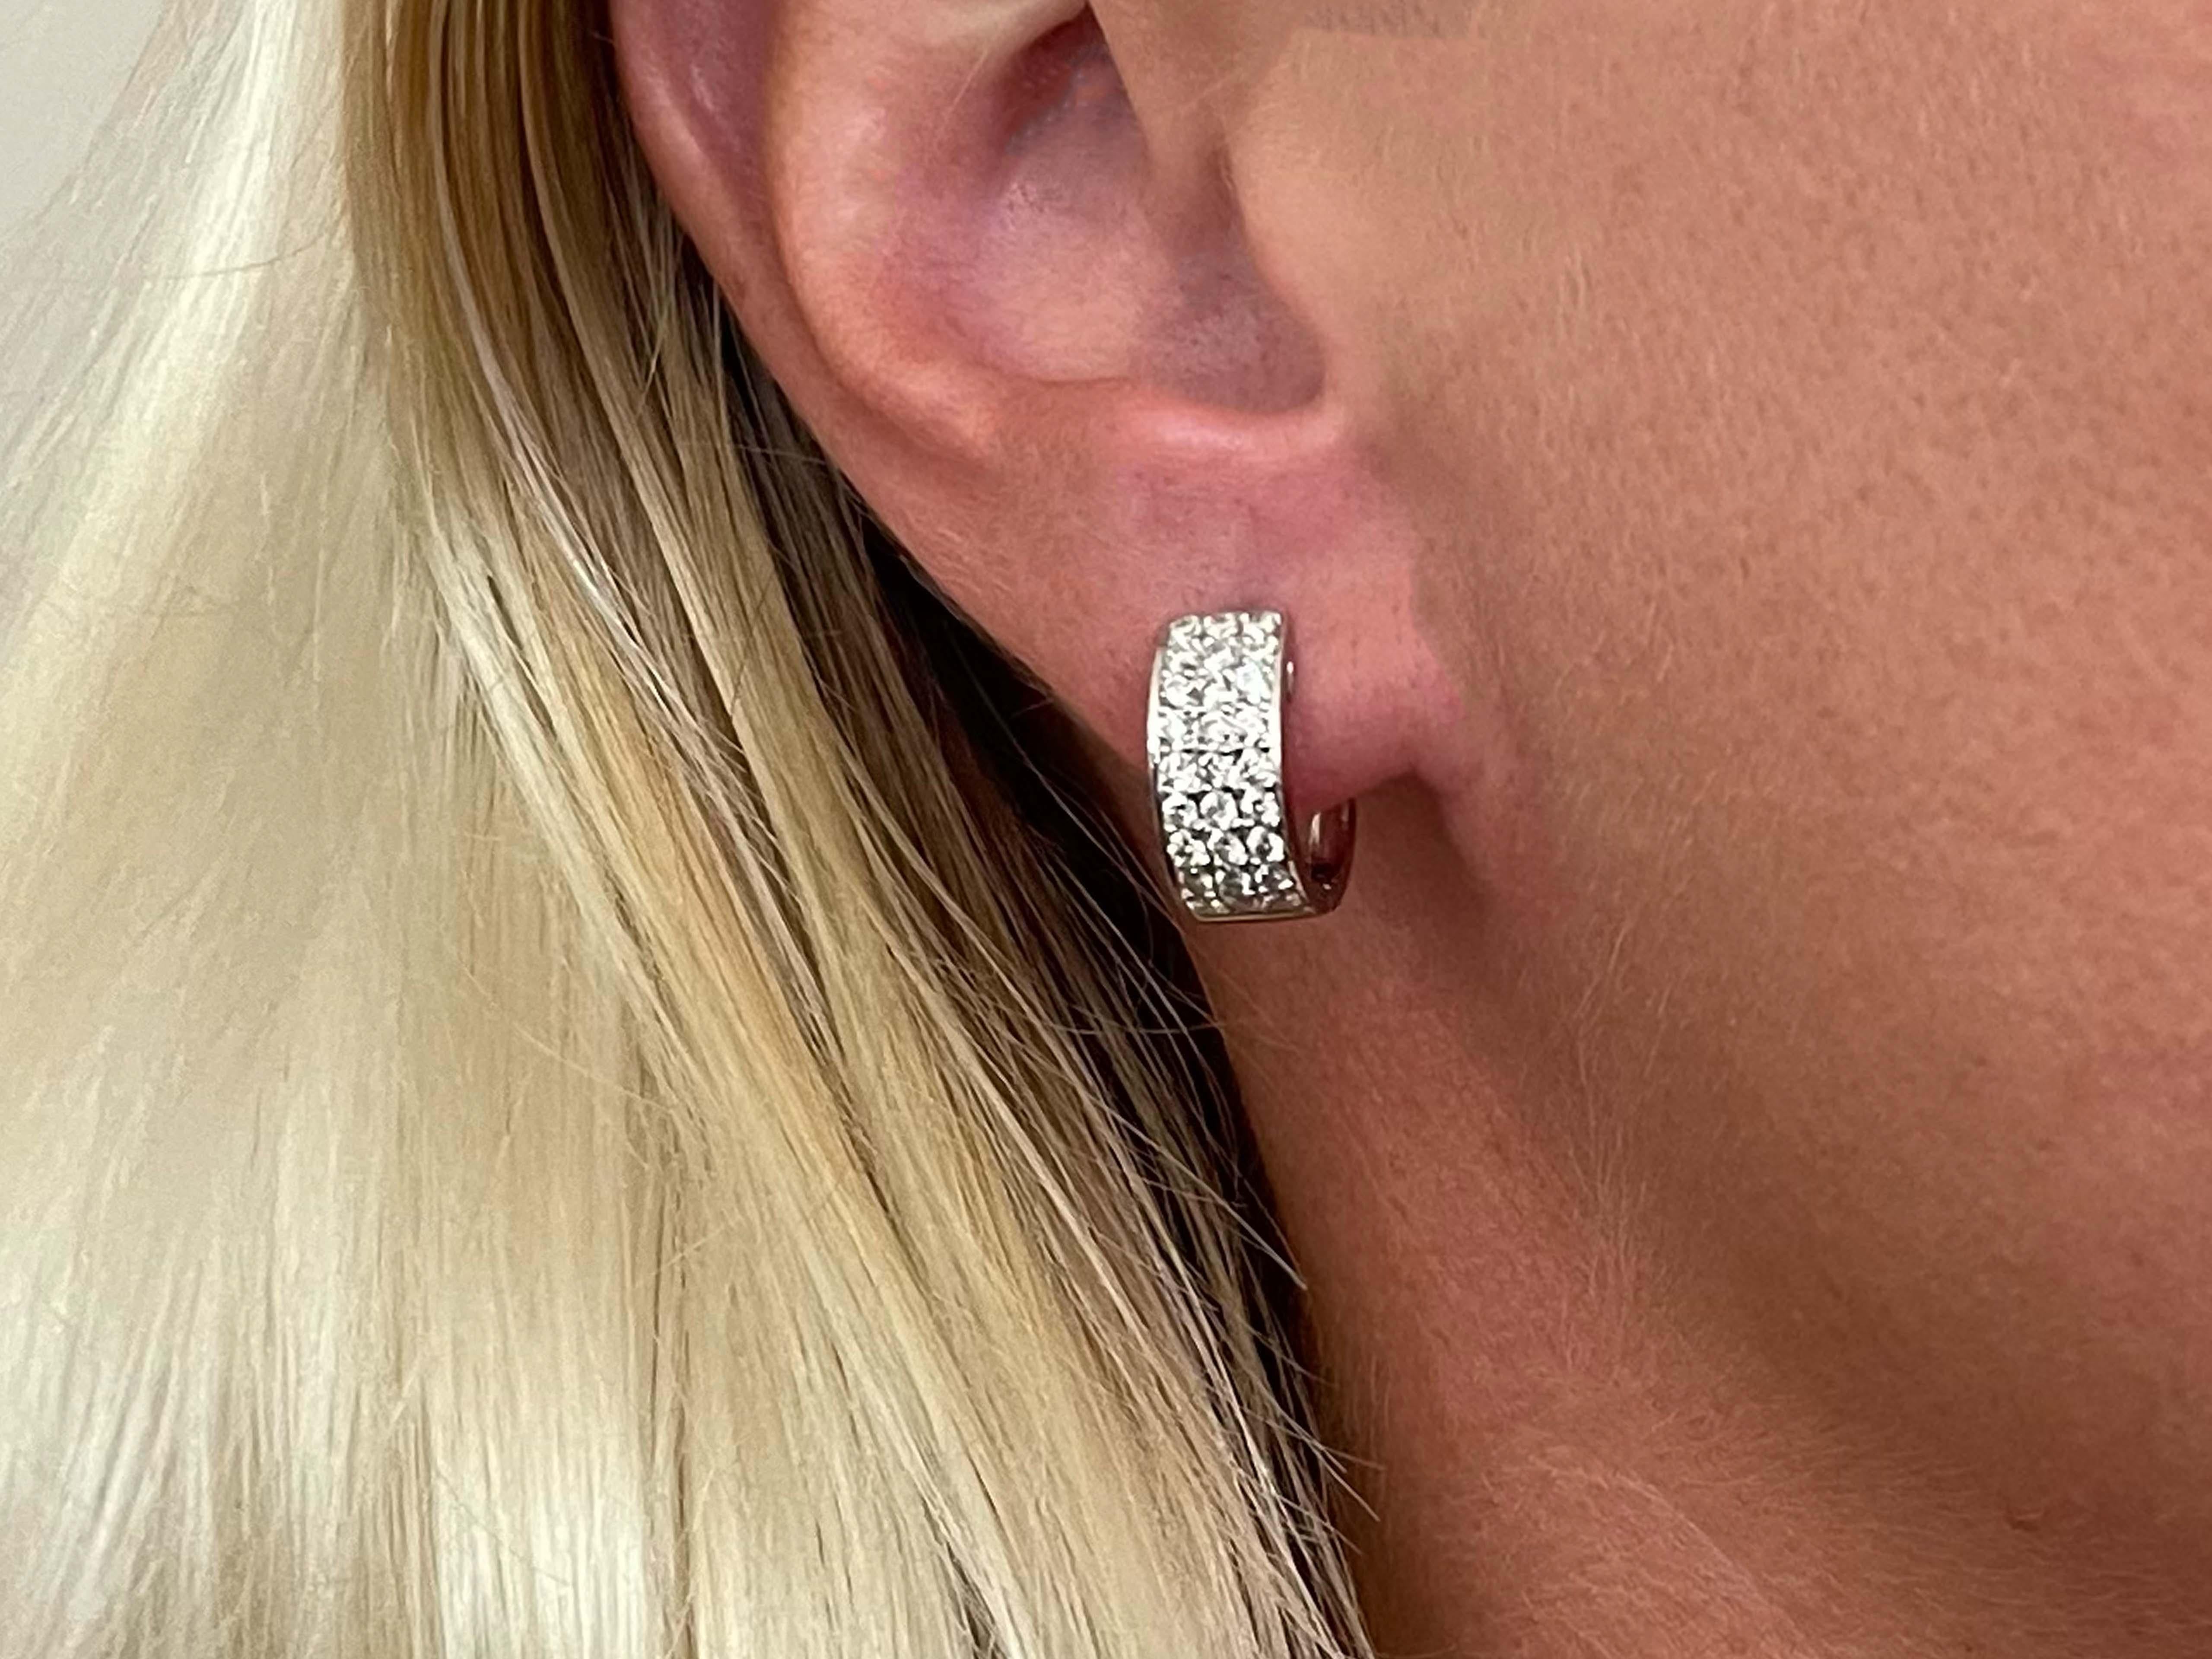 Earrings Specifications:

Style: Diamond Hoop Earrings

Metal: 18k White Gold

Total Weight: 8.2 Grams

Measurements: 14.4 mm tall and 6.4 mm wide 

Diamonds: 54 Round Brilliant Cut Diamonds

Diamond Setting: Prong

Diamond Color: G-H

Diamond